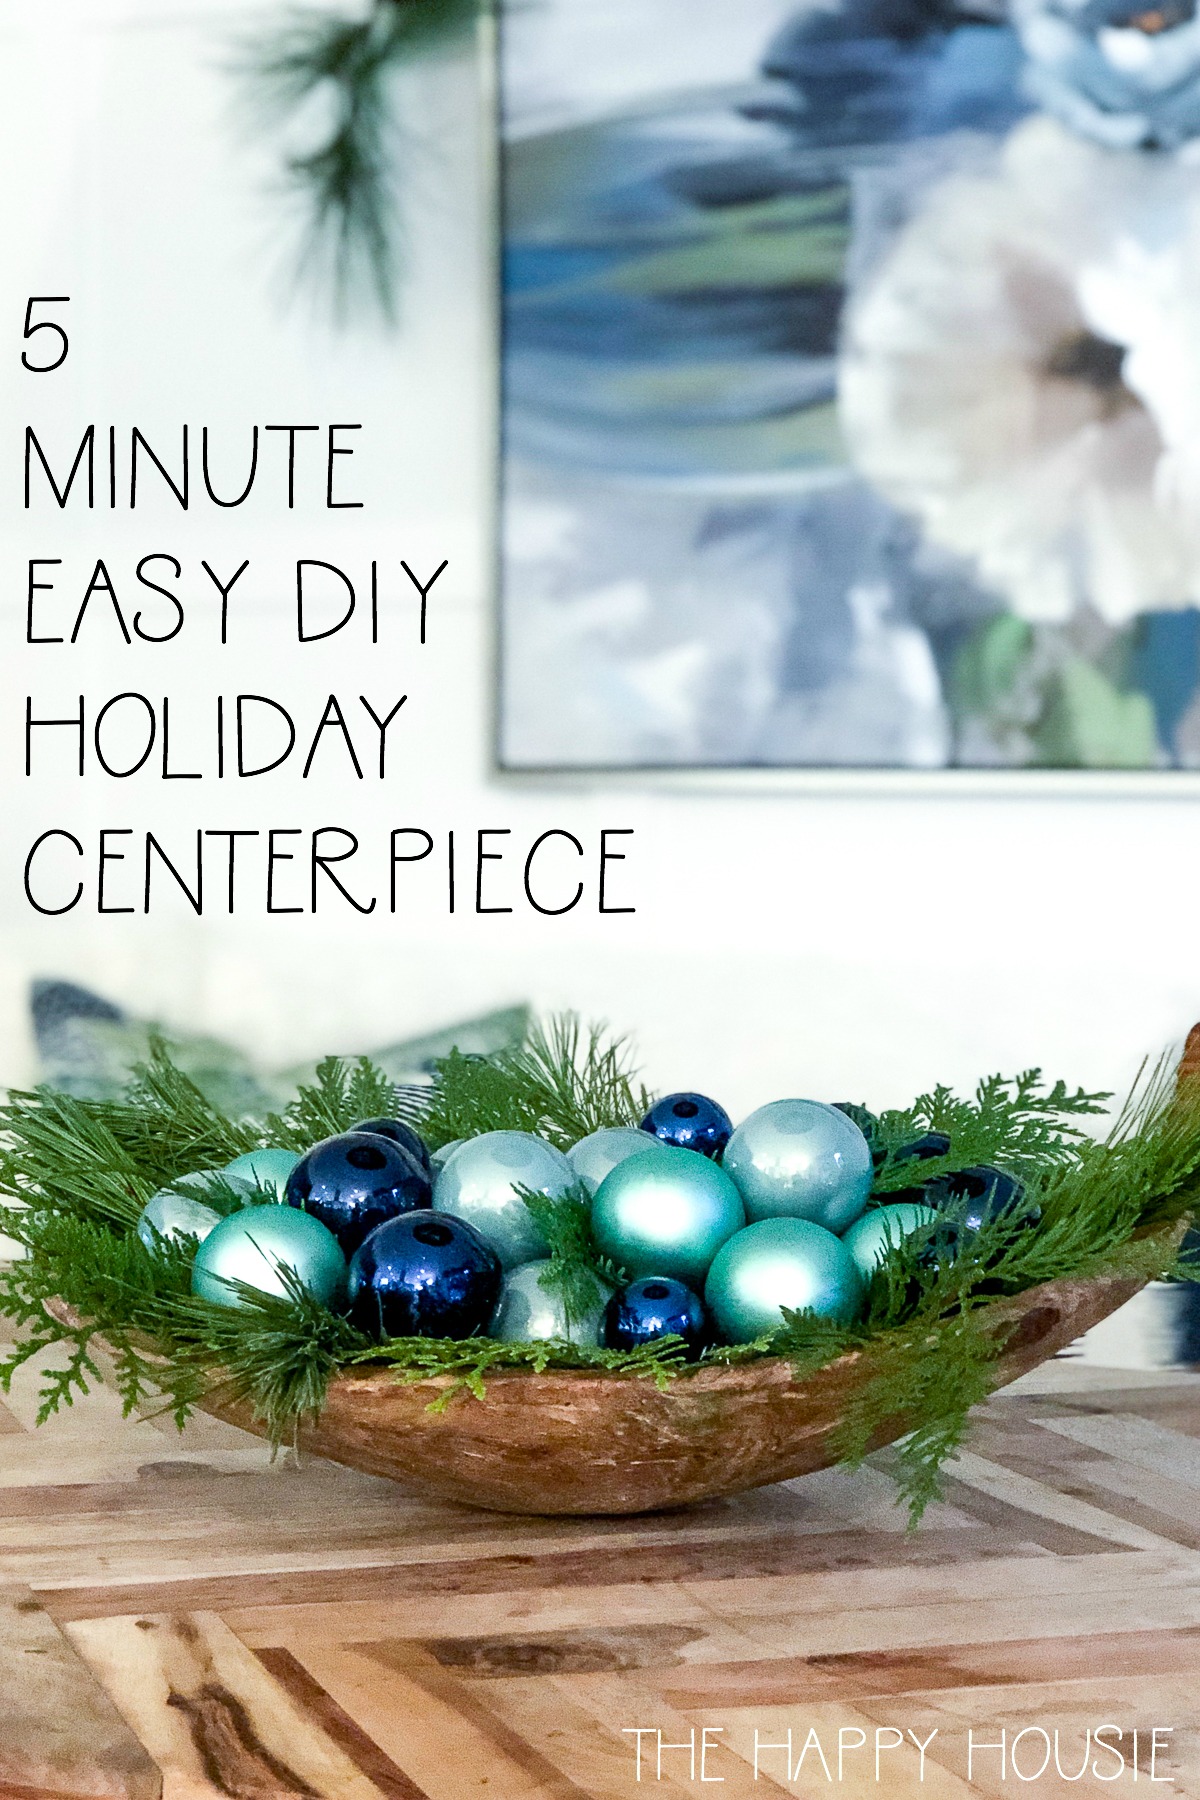 5 Minute Easy DIY Holiday Centerpiece poster.